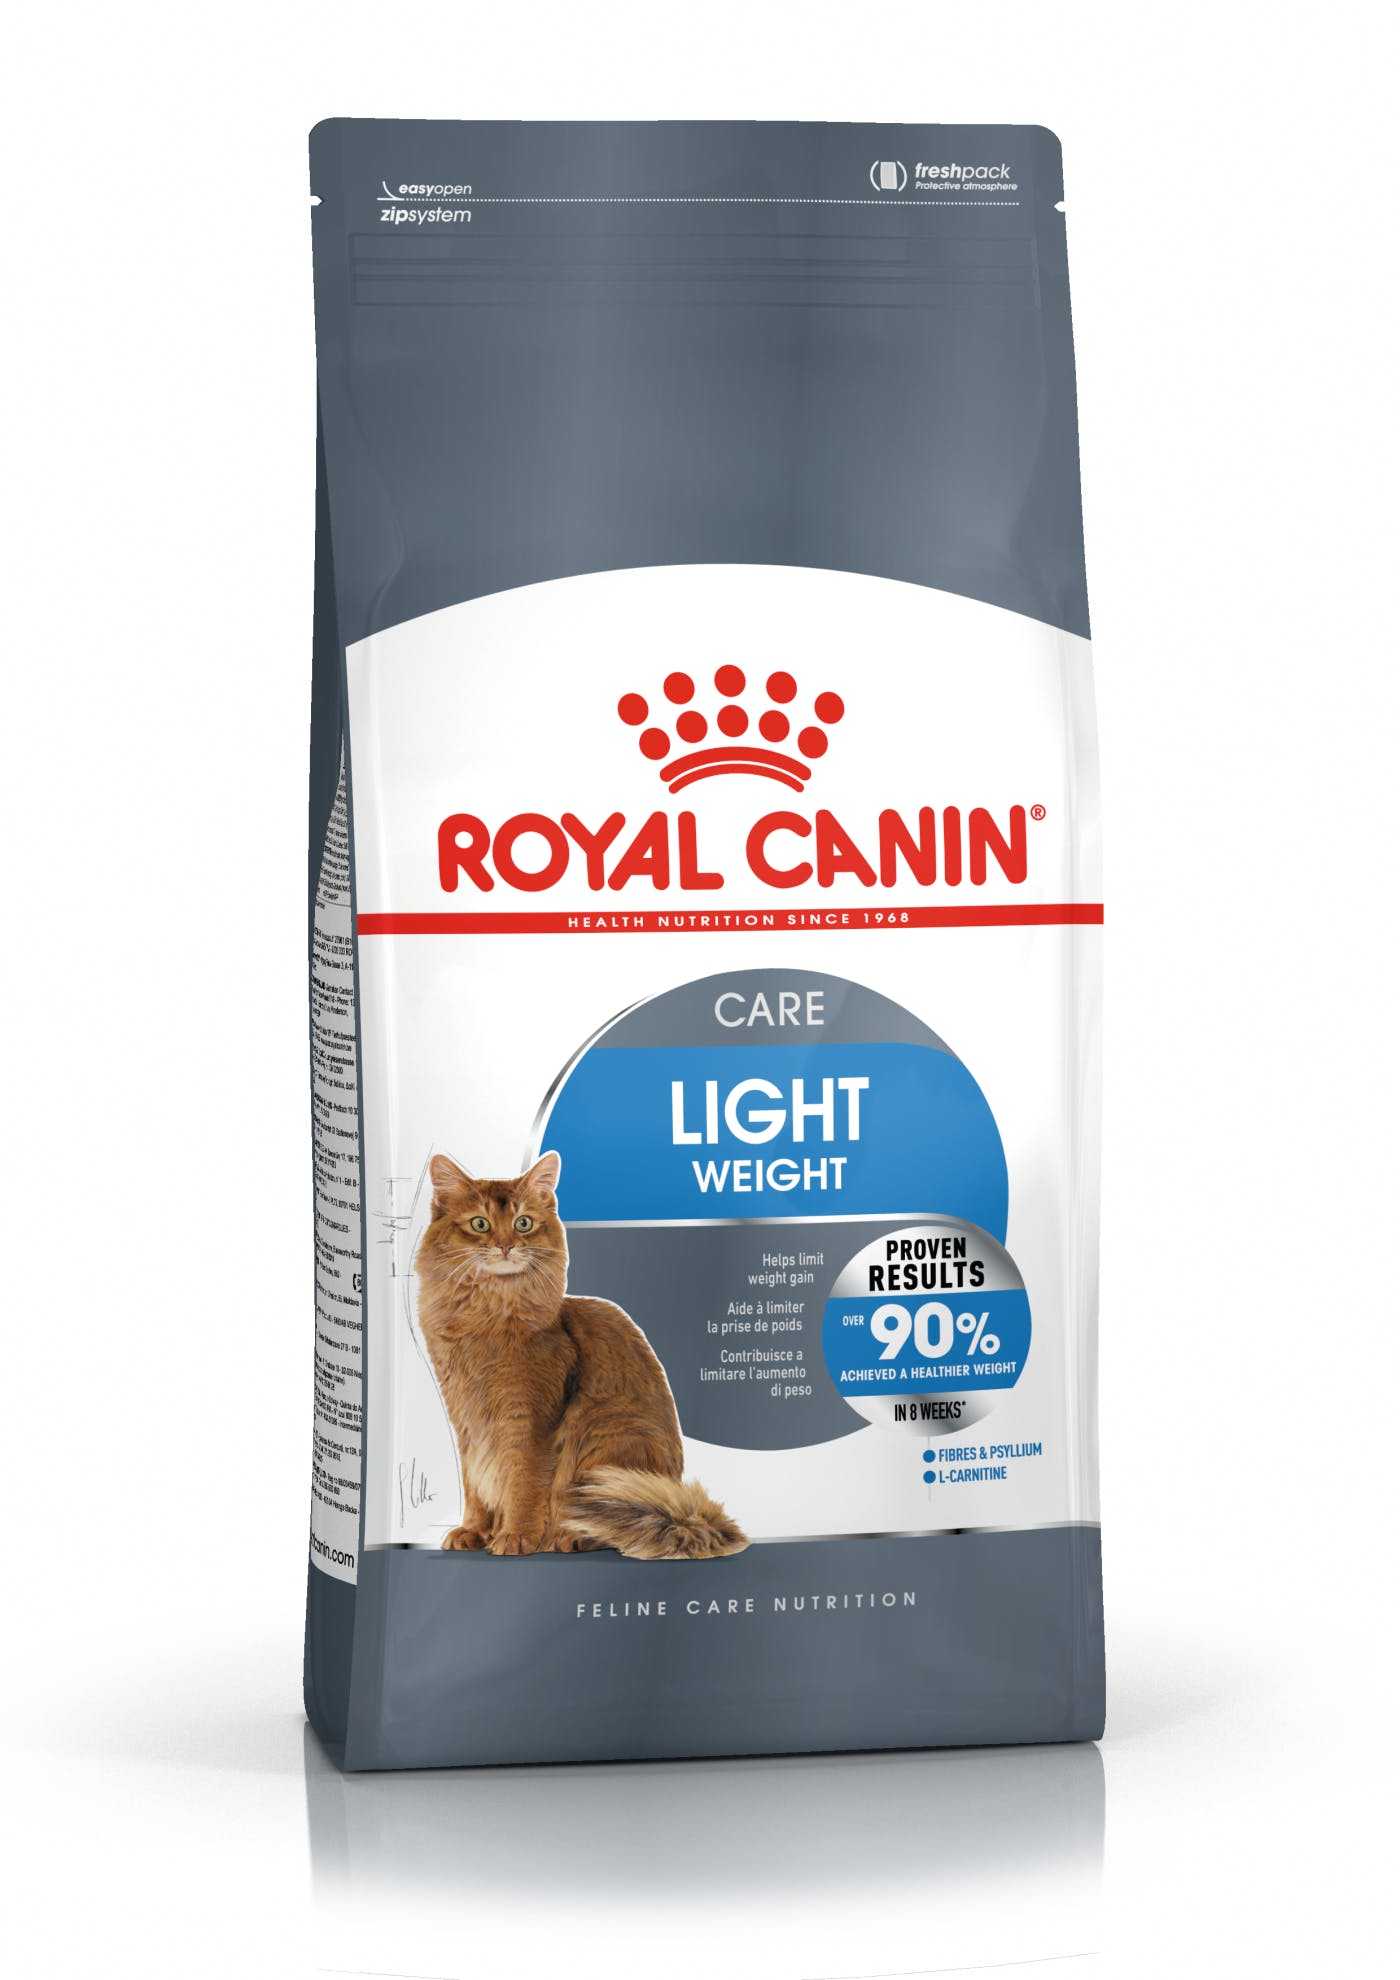 Royal Canin Light Weight Care 8 Kg.